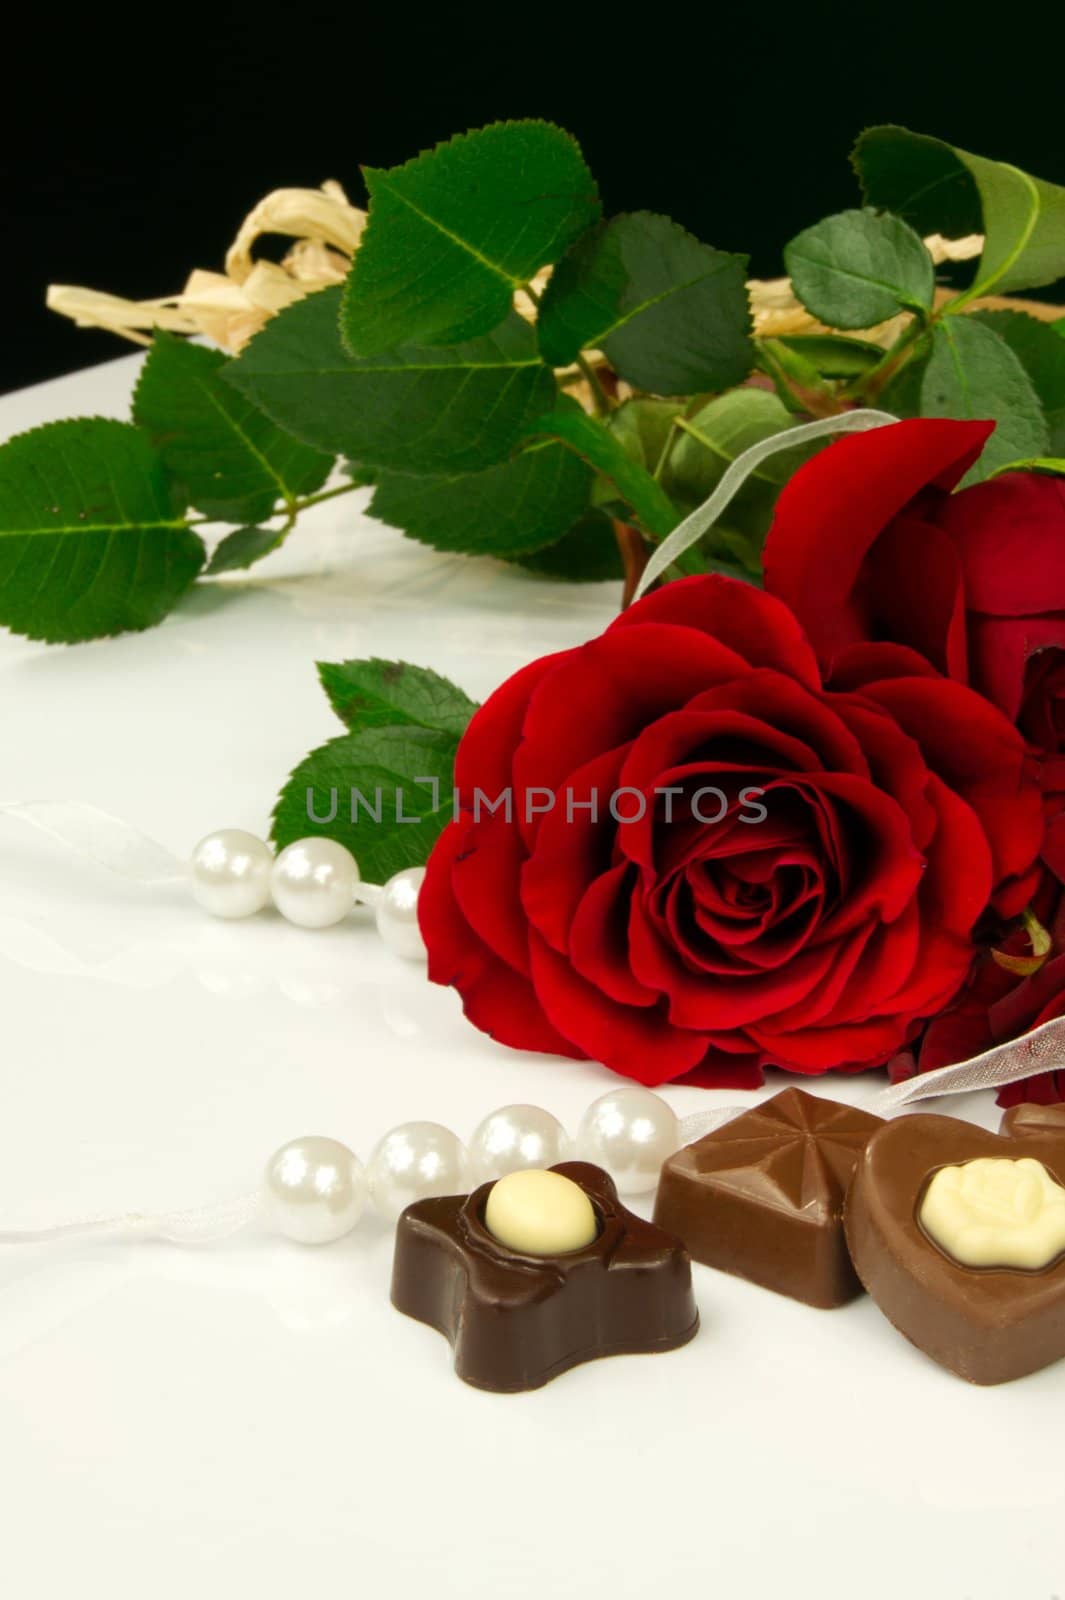 Rose, pearls and chocolate. Traditional beauty valentine composition